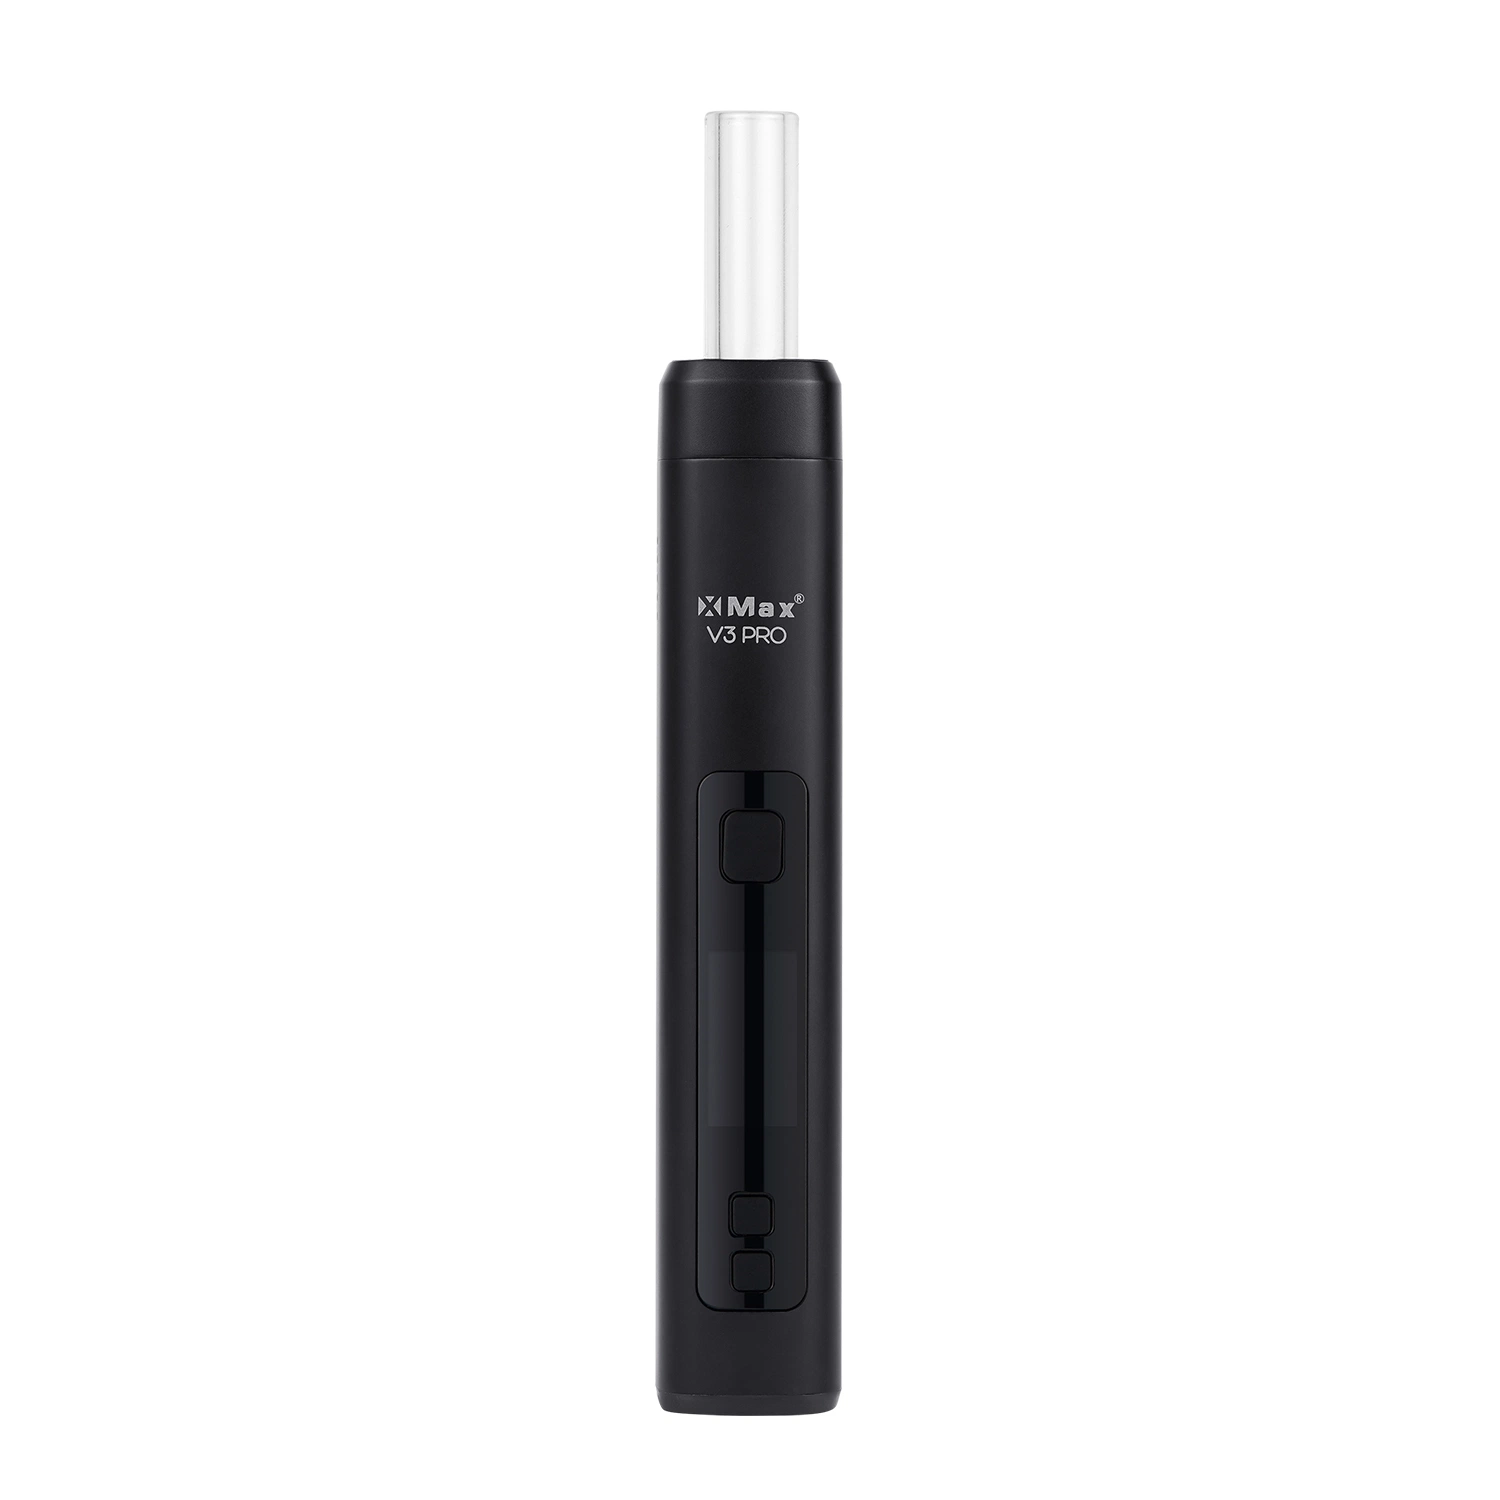 Xmax V3 PRO Wholesale/Supplier OEM Market Best Selling Heating Dry Herb and Wax Smoke Electronic Rechargeable Vape Pen